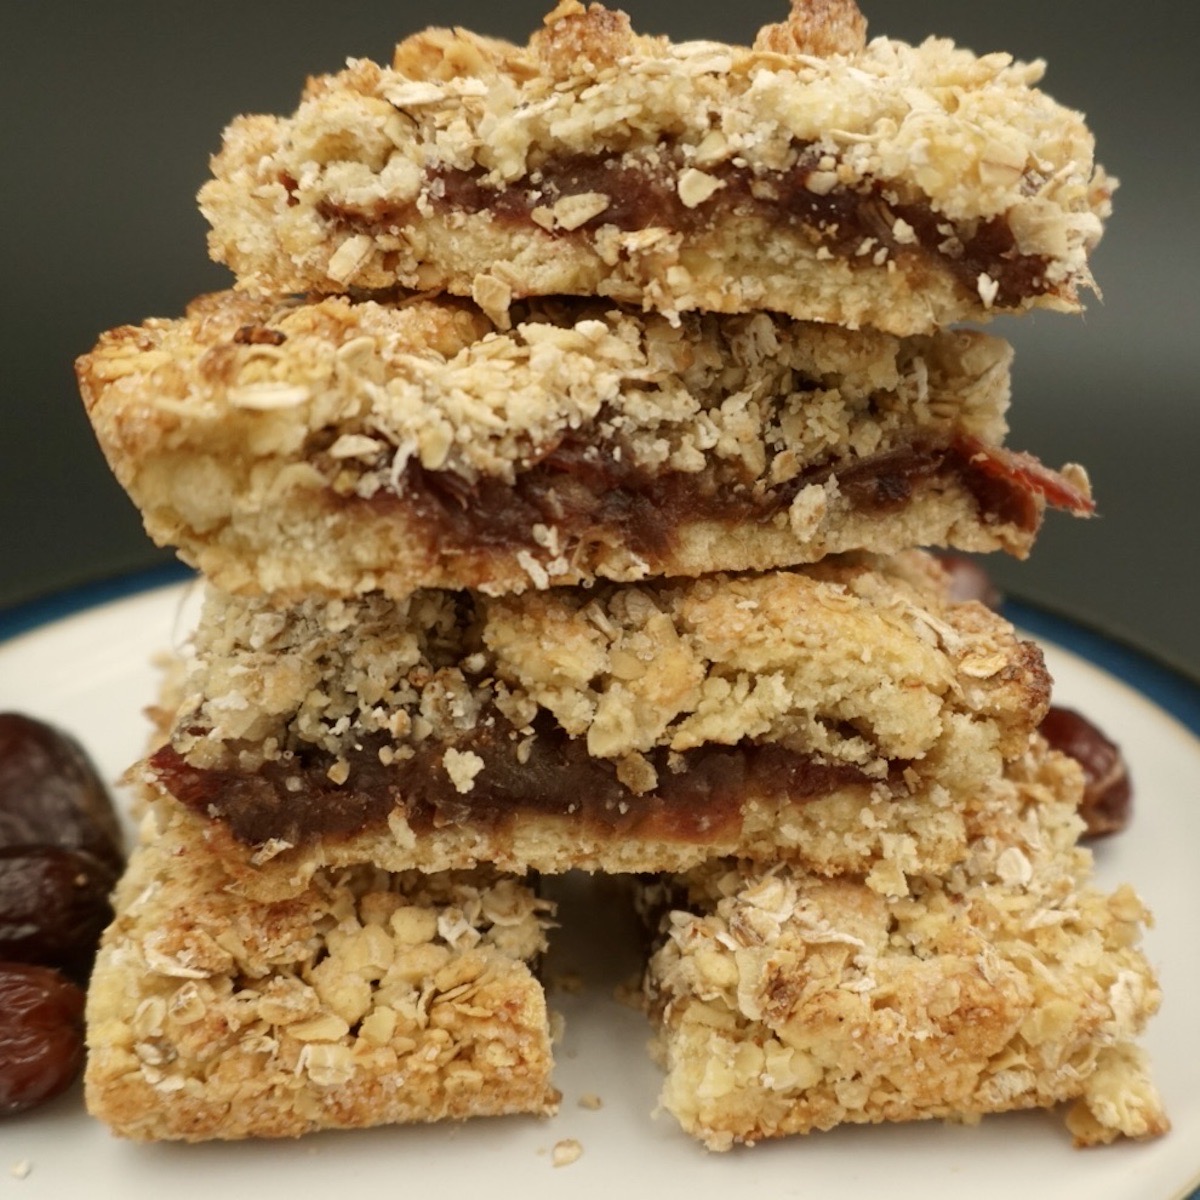 Date and oat slices